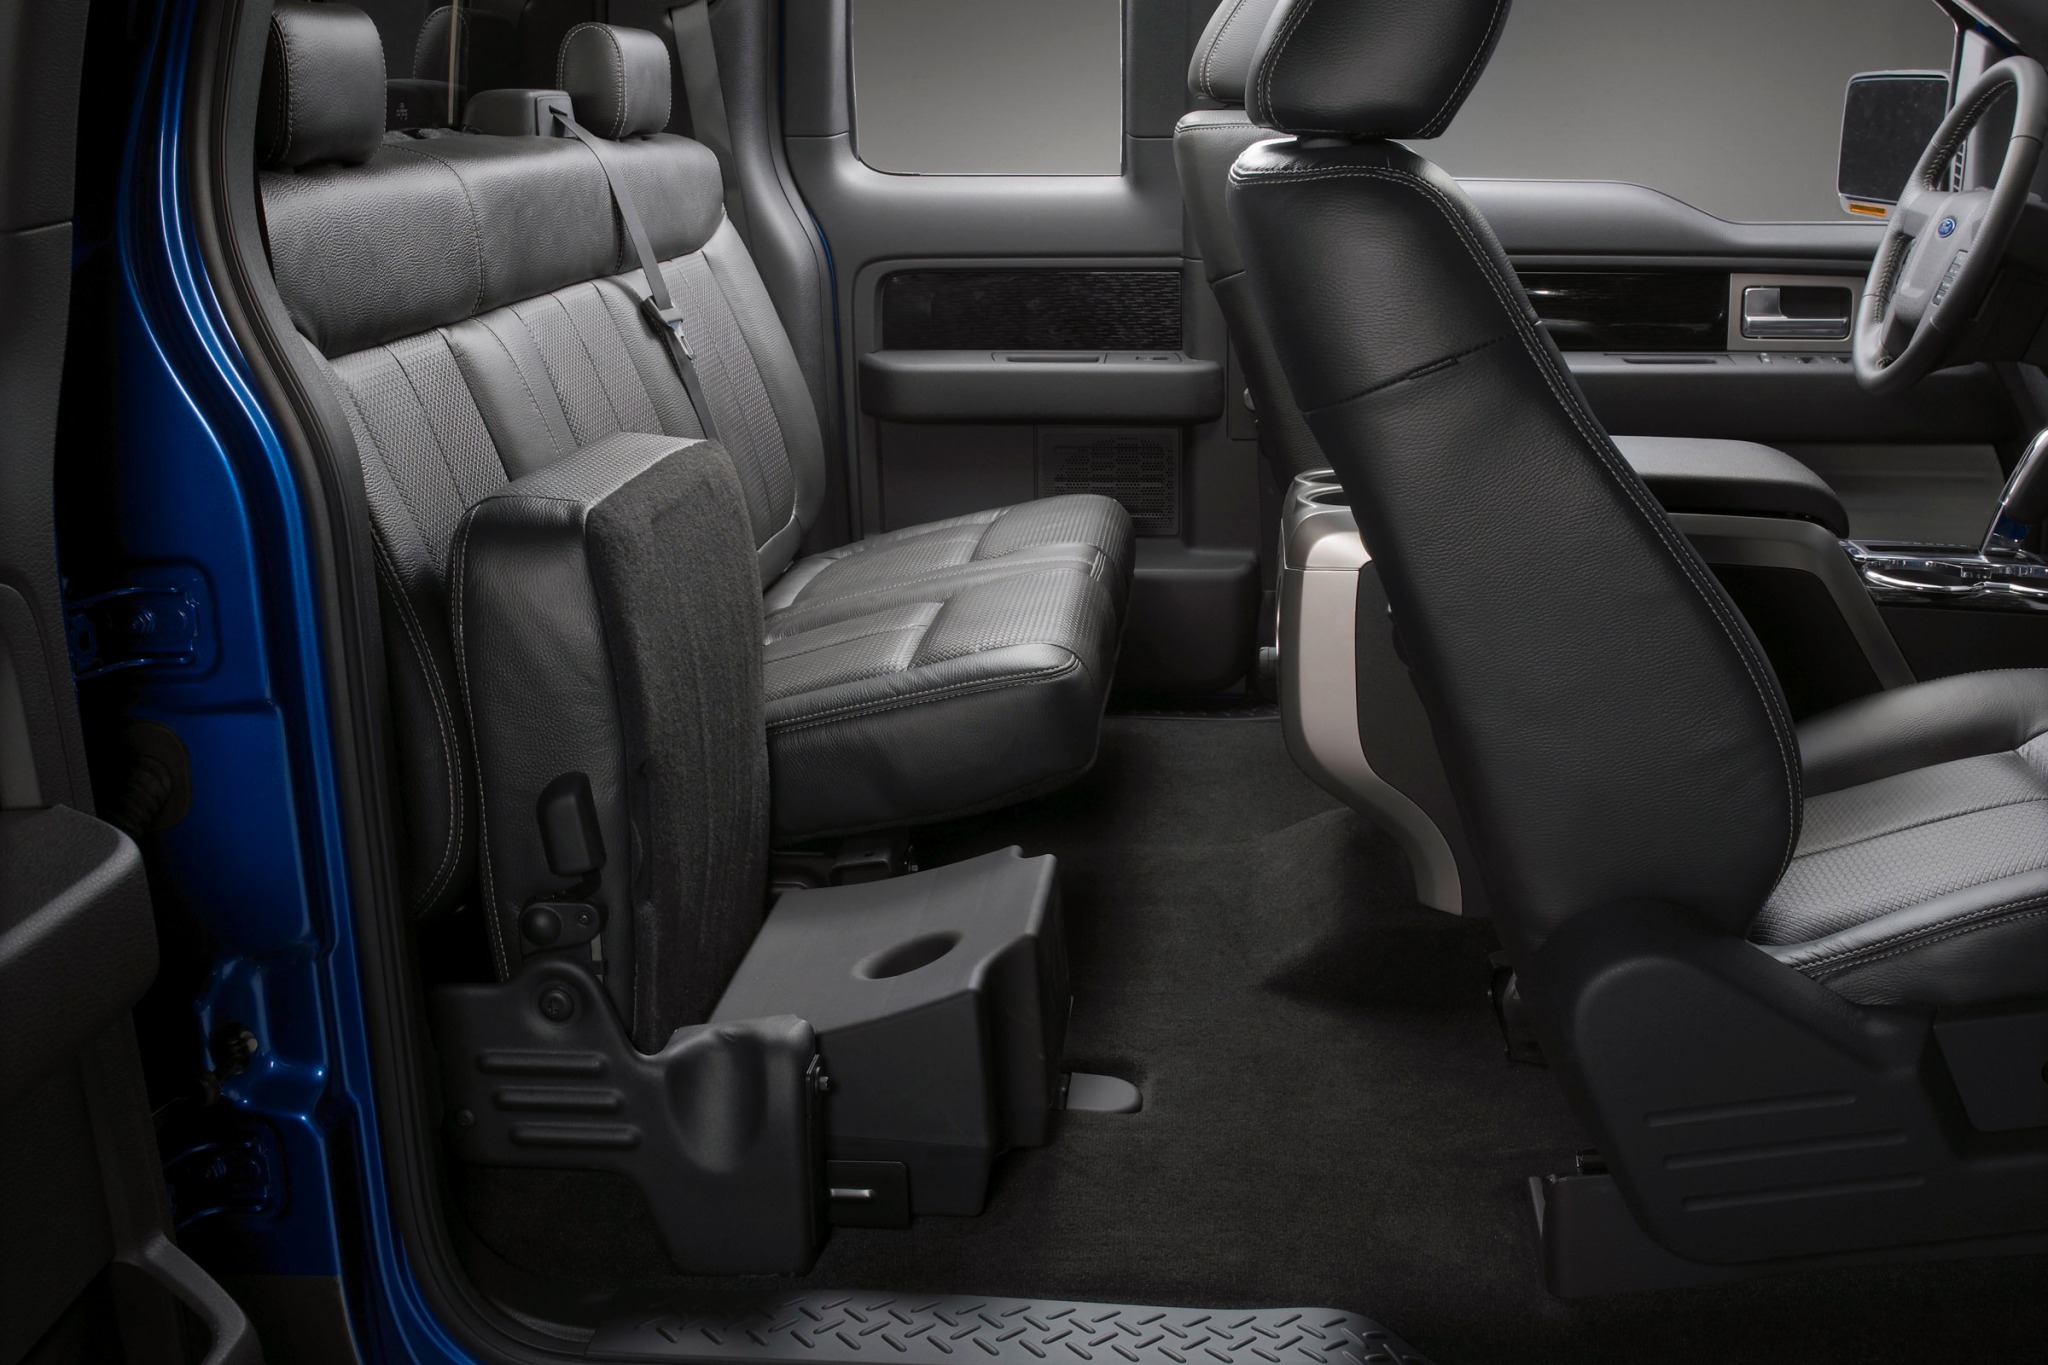 2010 Ford F-150 FX4 Extended Cab Pickup Rear Interior